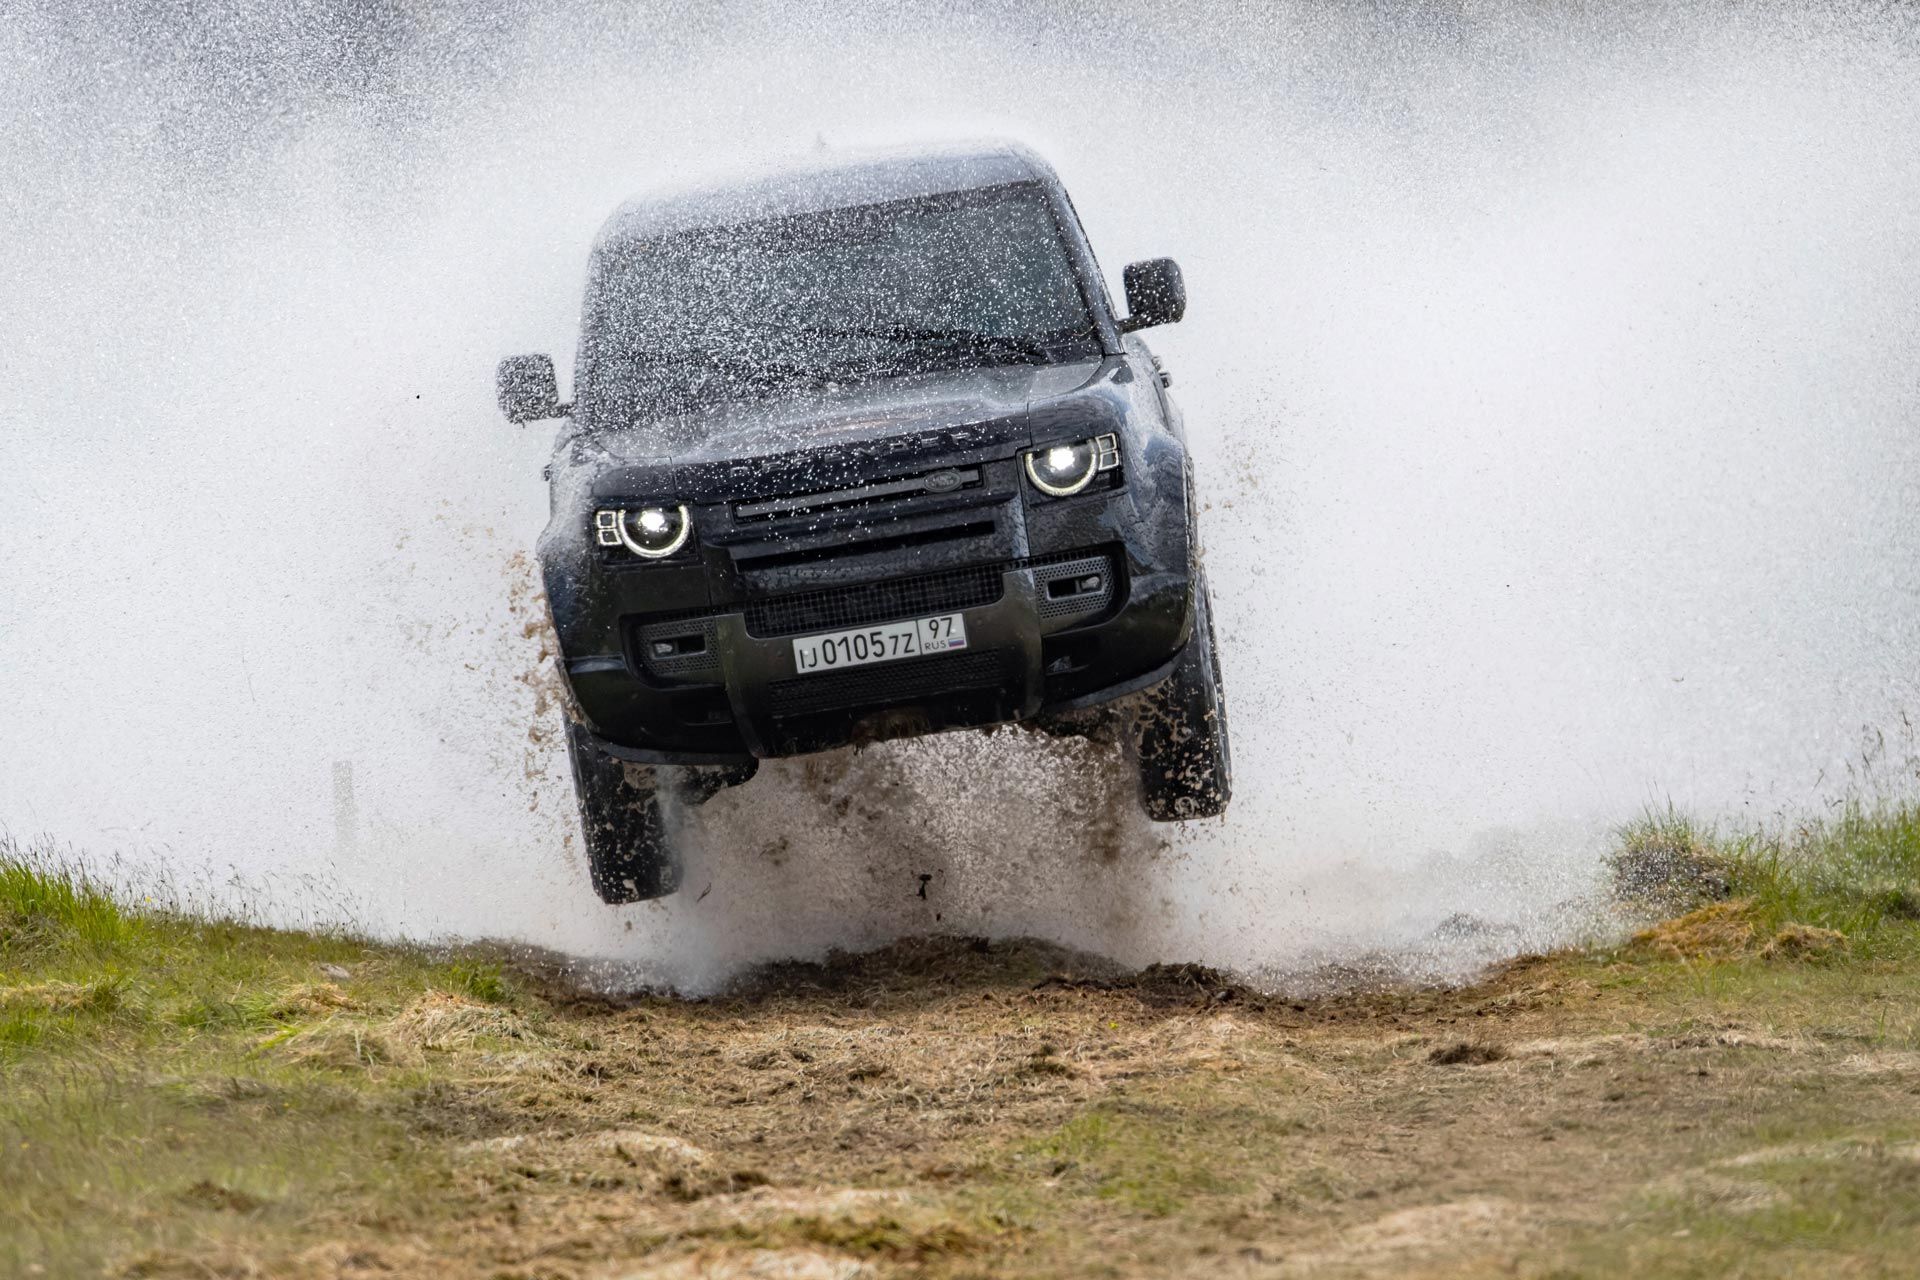 This is the new Land Rover defender as featured in 007 No Time to Die